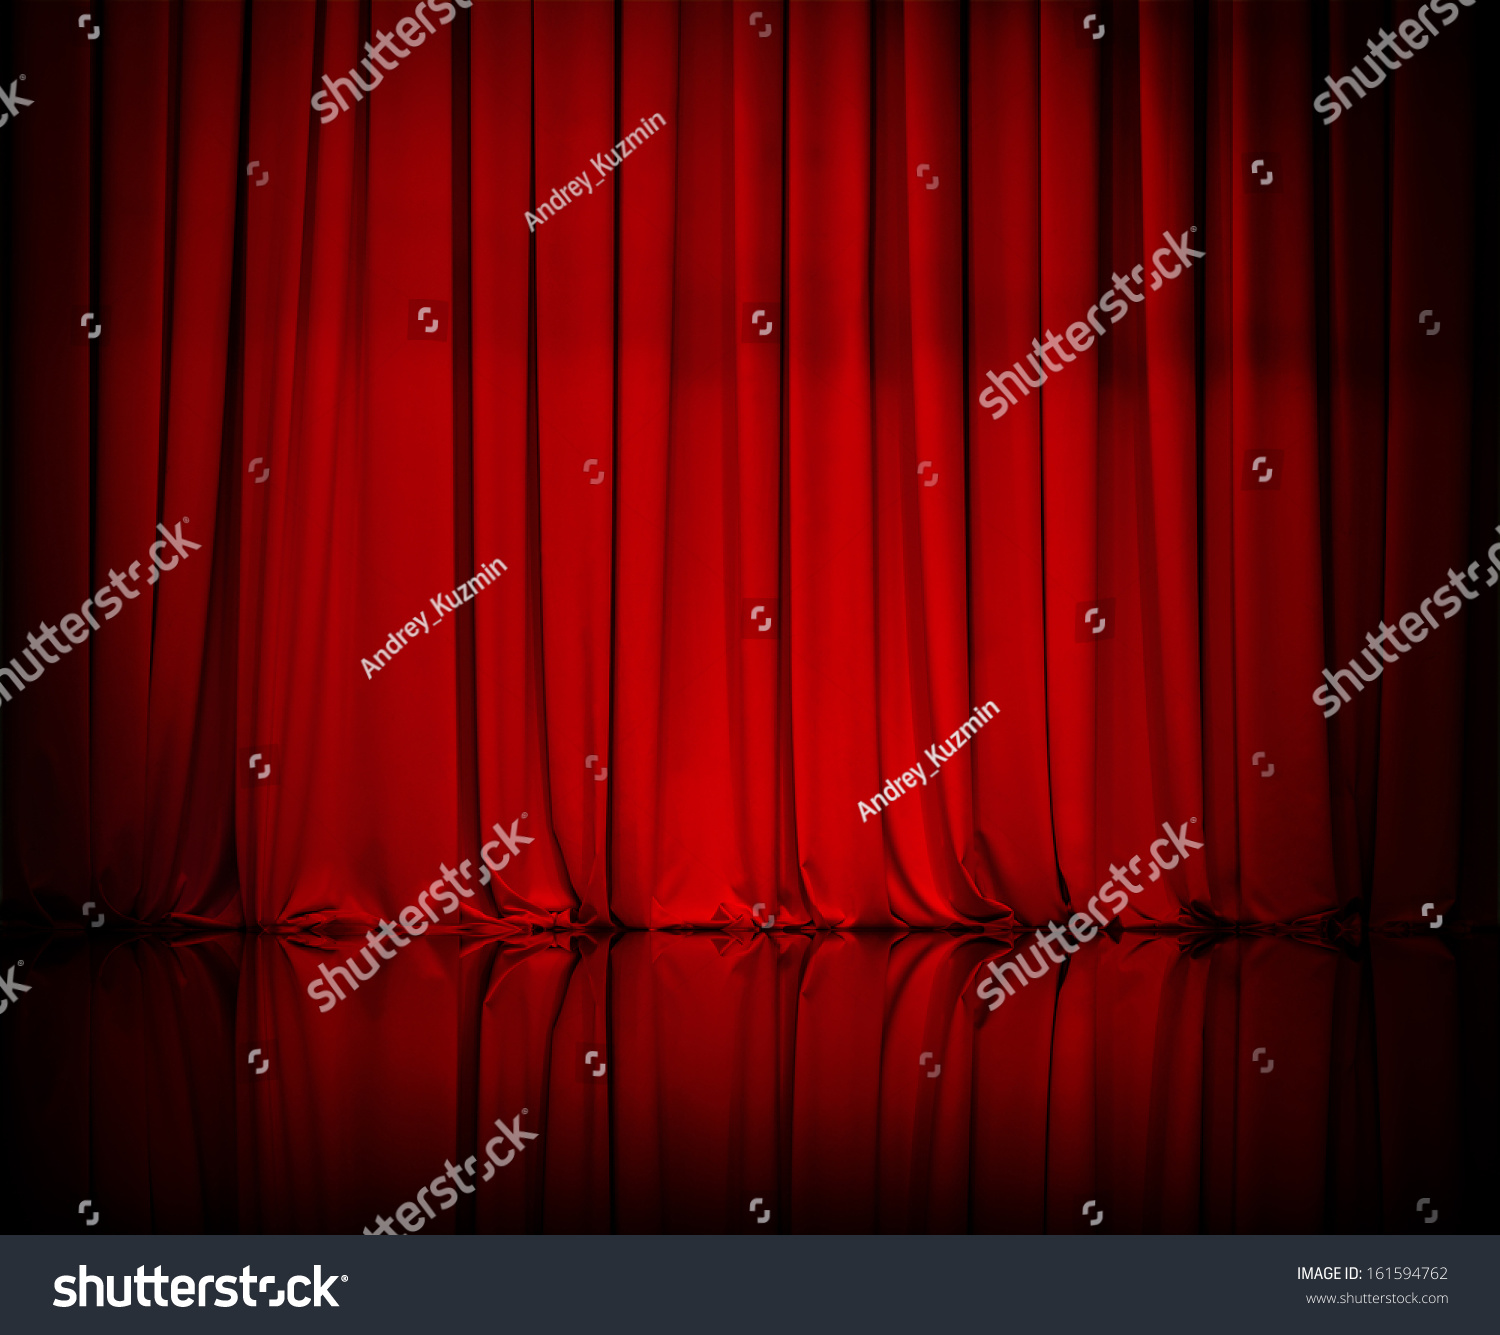 curtain or drapes red background #161594762